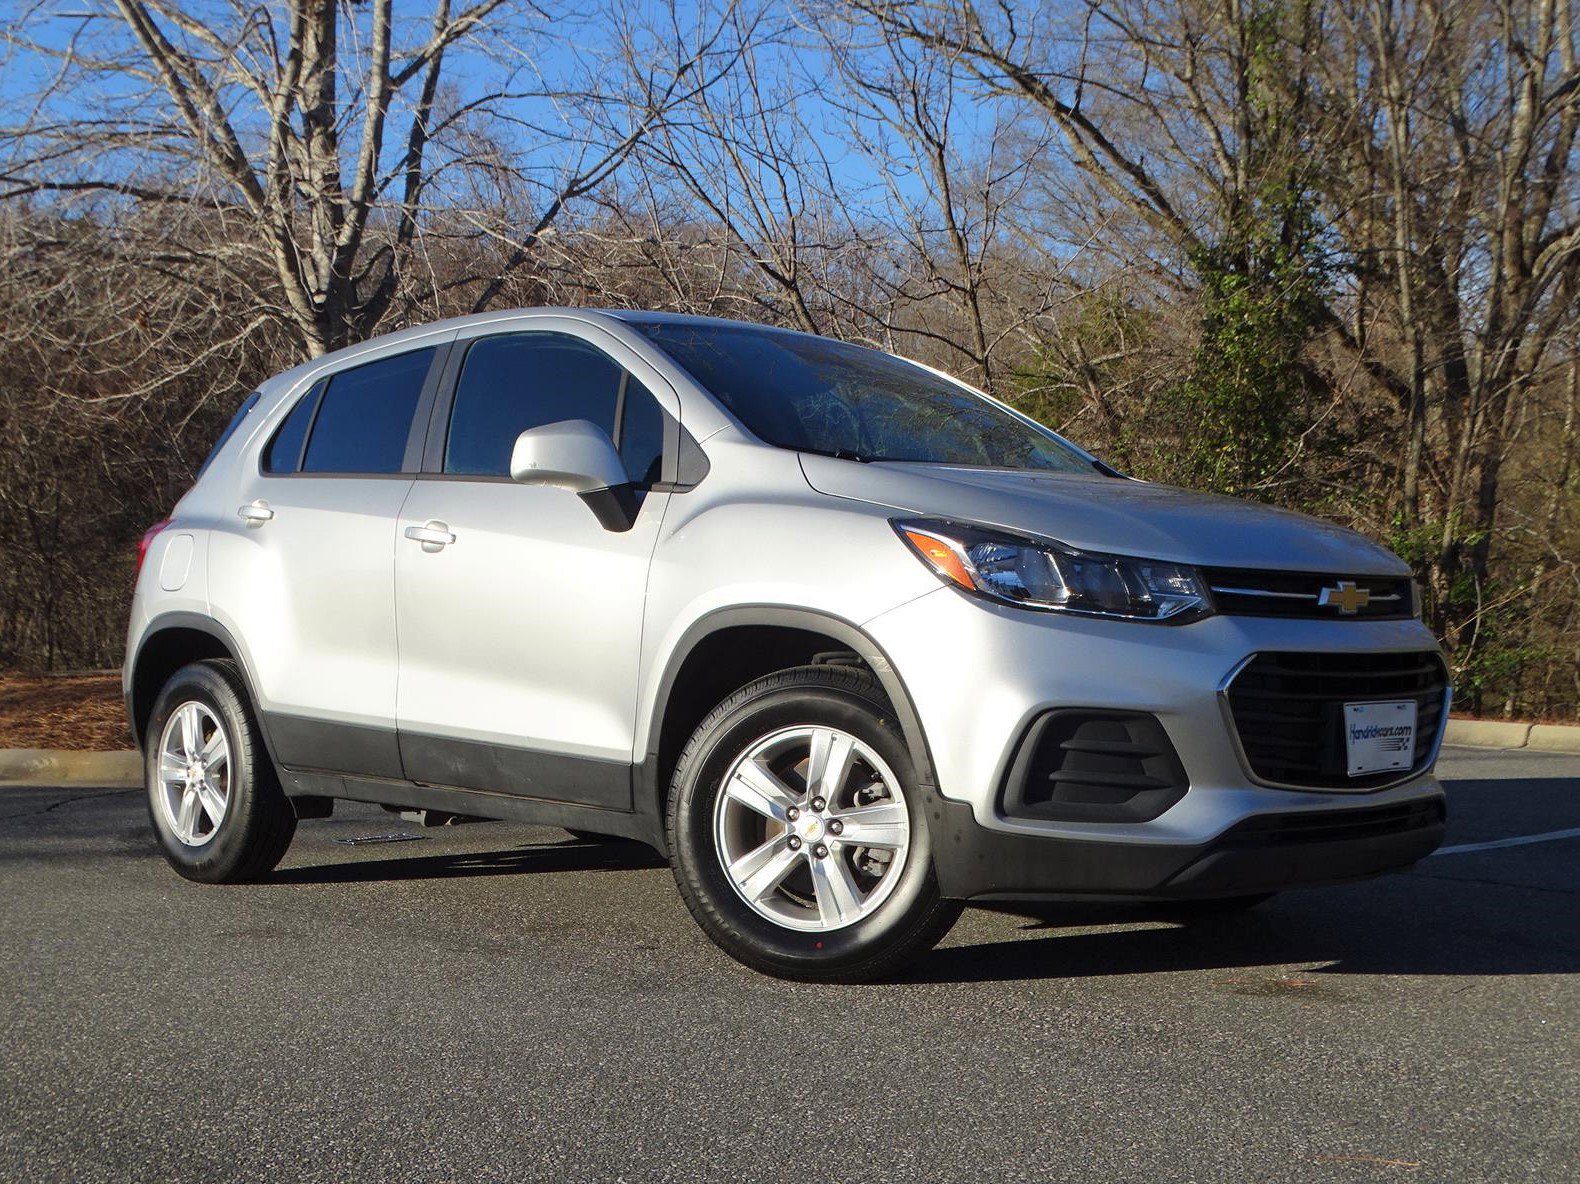 Certified Pre-Owned 2018 Chevrolet Trax LS SUV in Cary #Q29166A | Hendrick  Kia of Cary